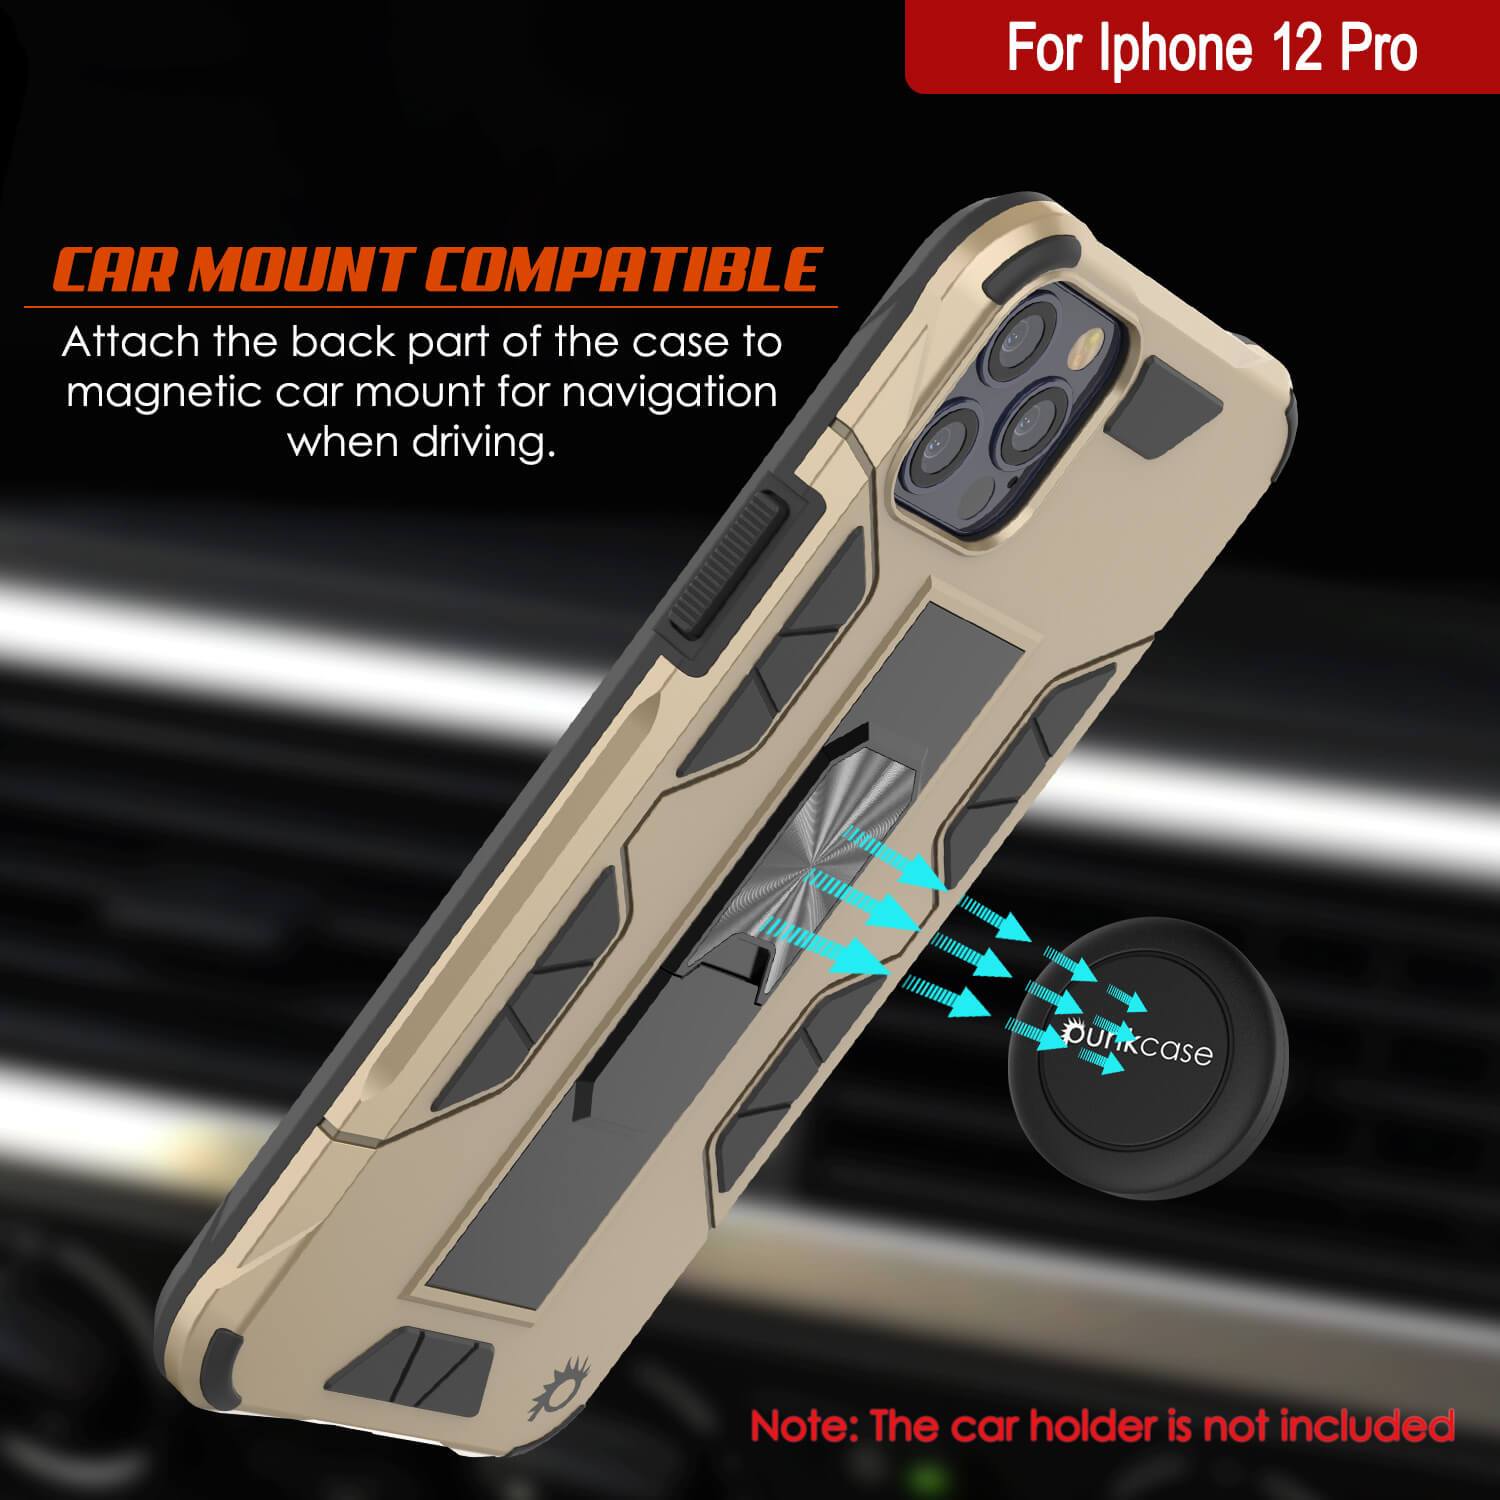 Punkcase iPhone 12 Pro Case [ArmorShield Series] Military Style Protective Dual Layer Case Gold